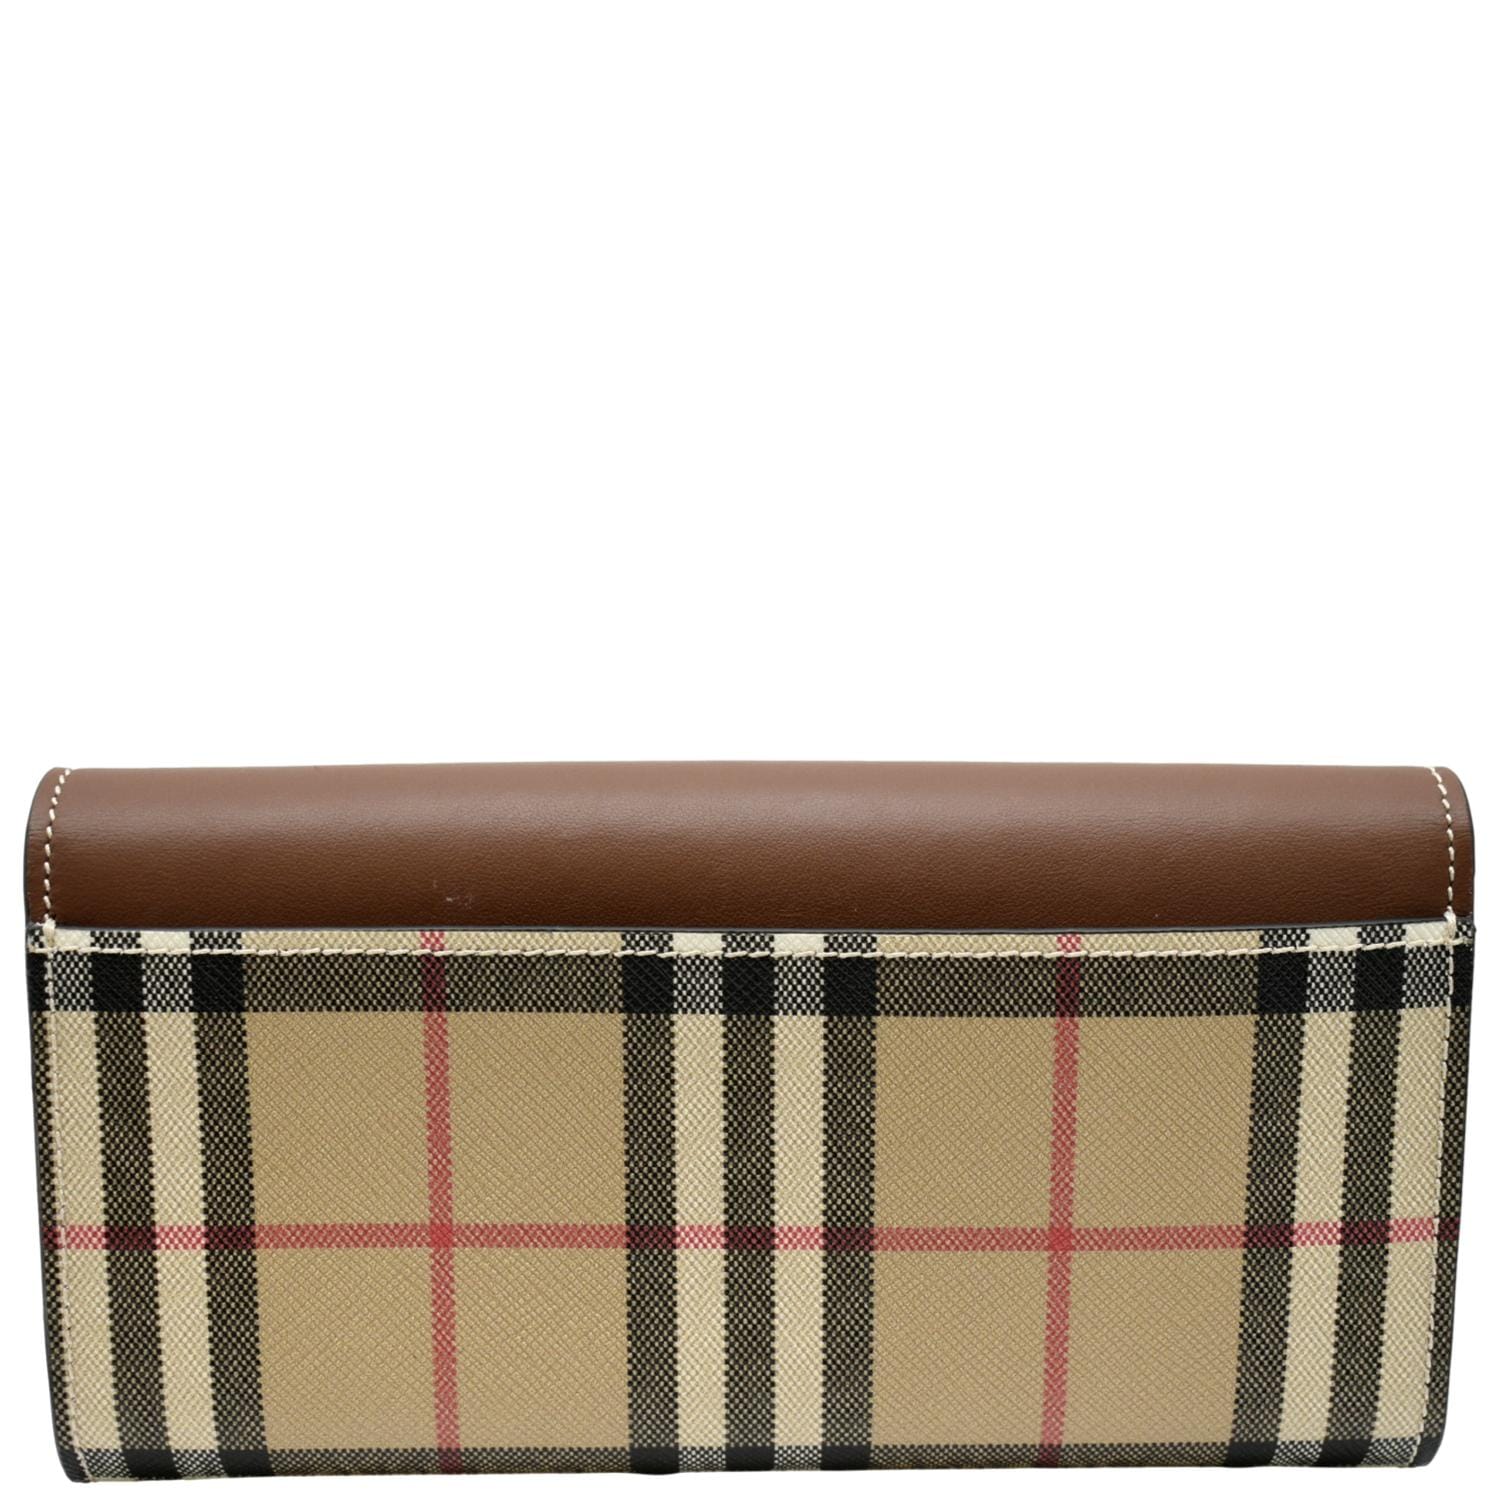 Burberry Vintage-Check Leather Wallet - Brown